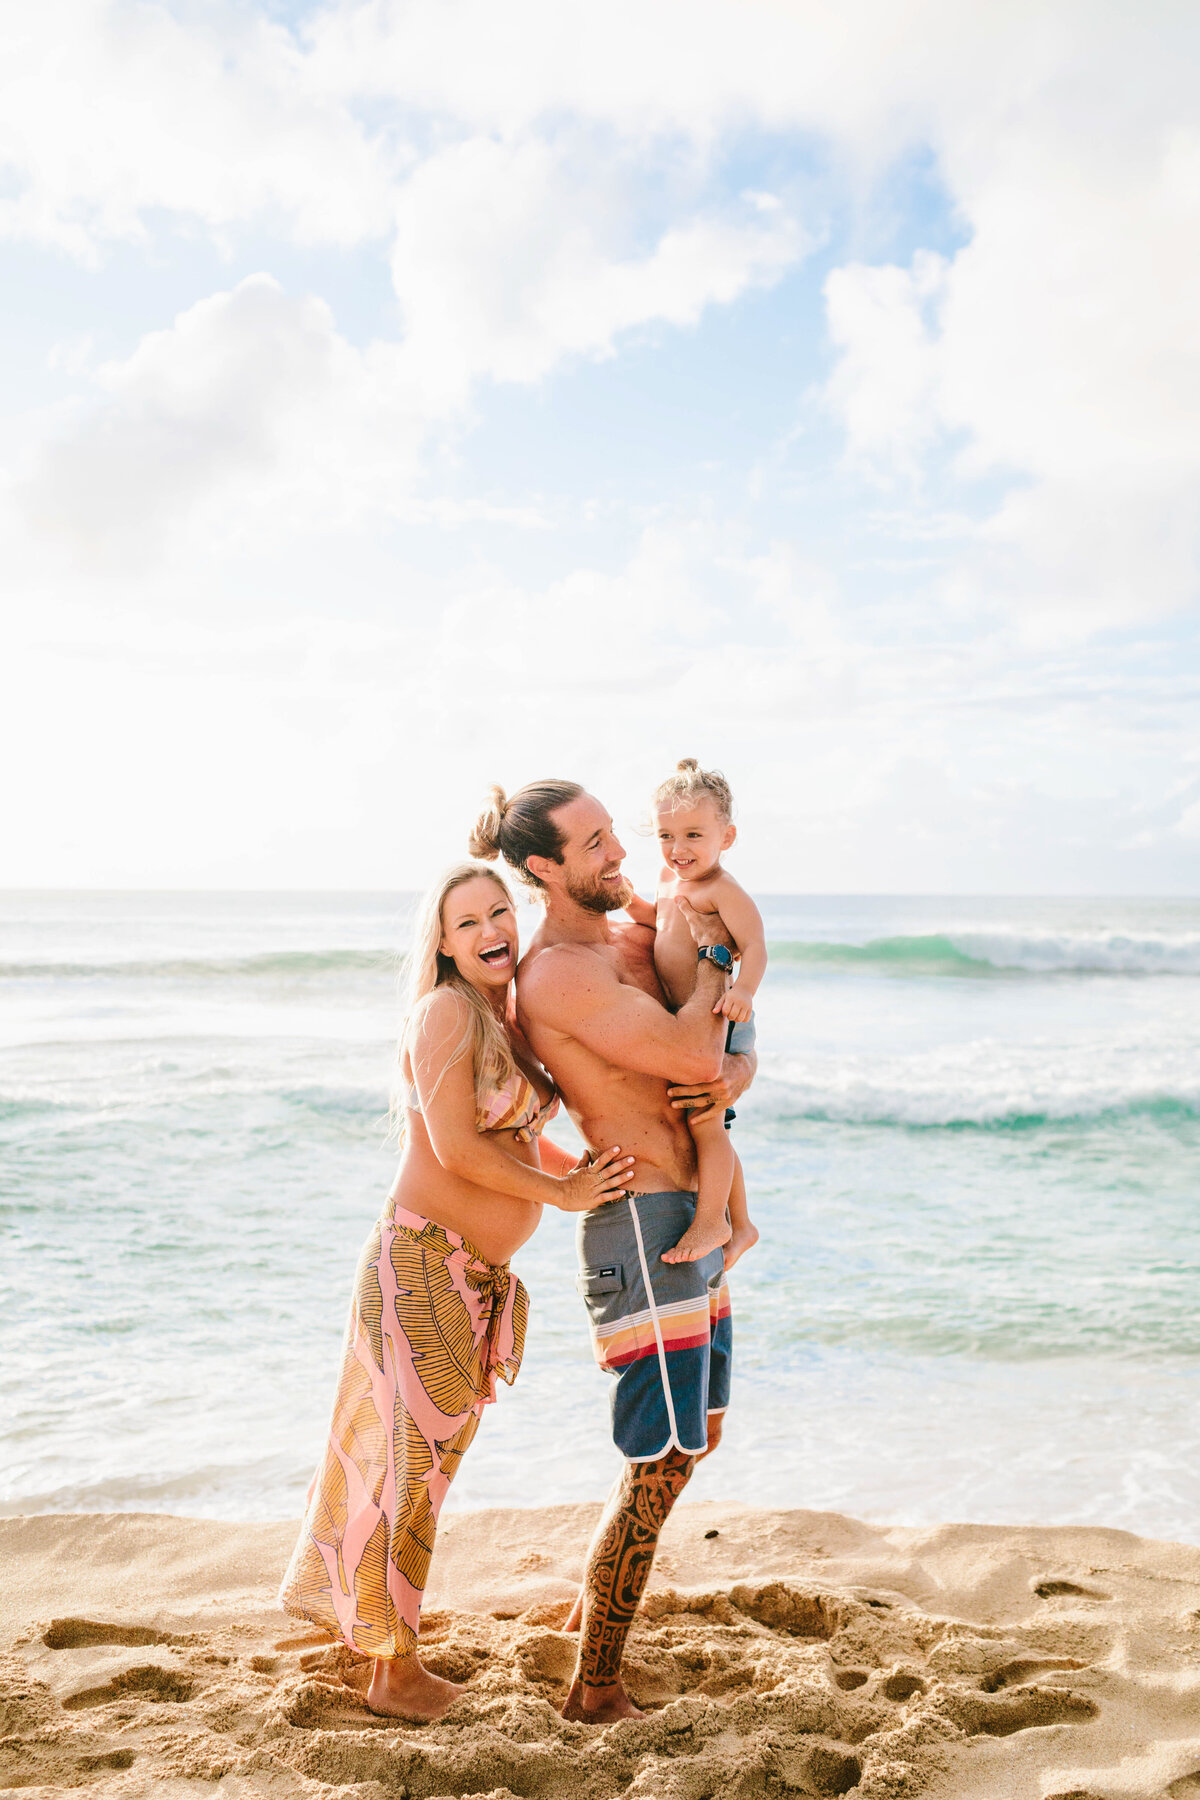 Best California and Texas Family Photographer-Jodee Debes Photography-18